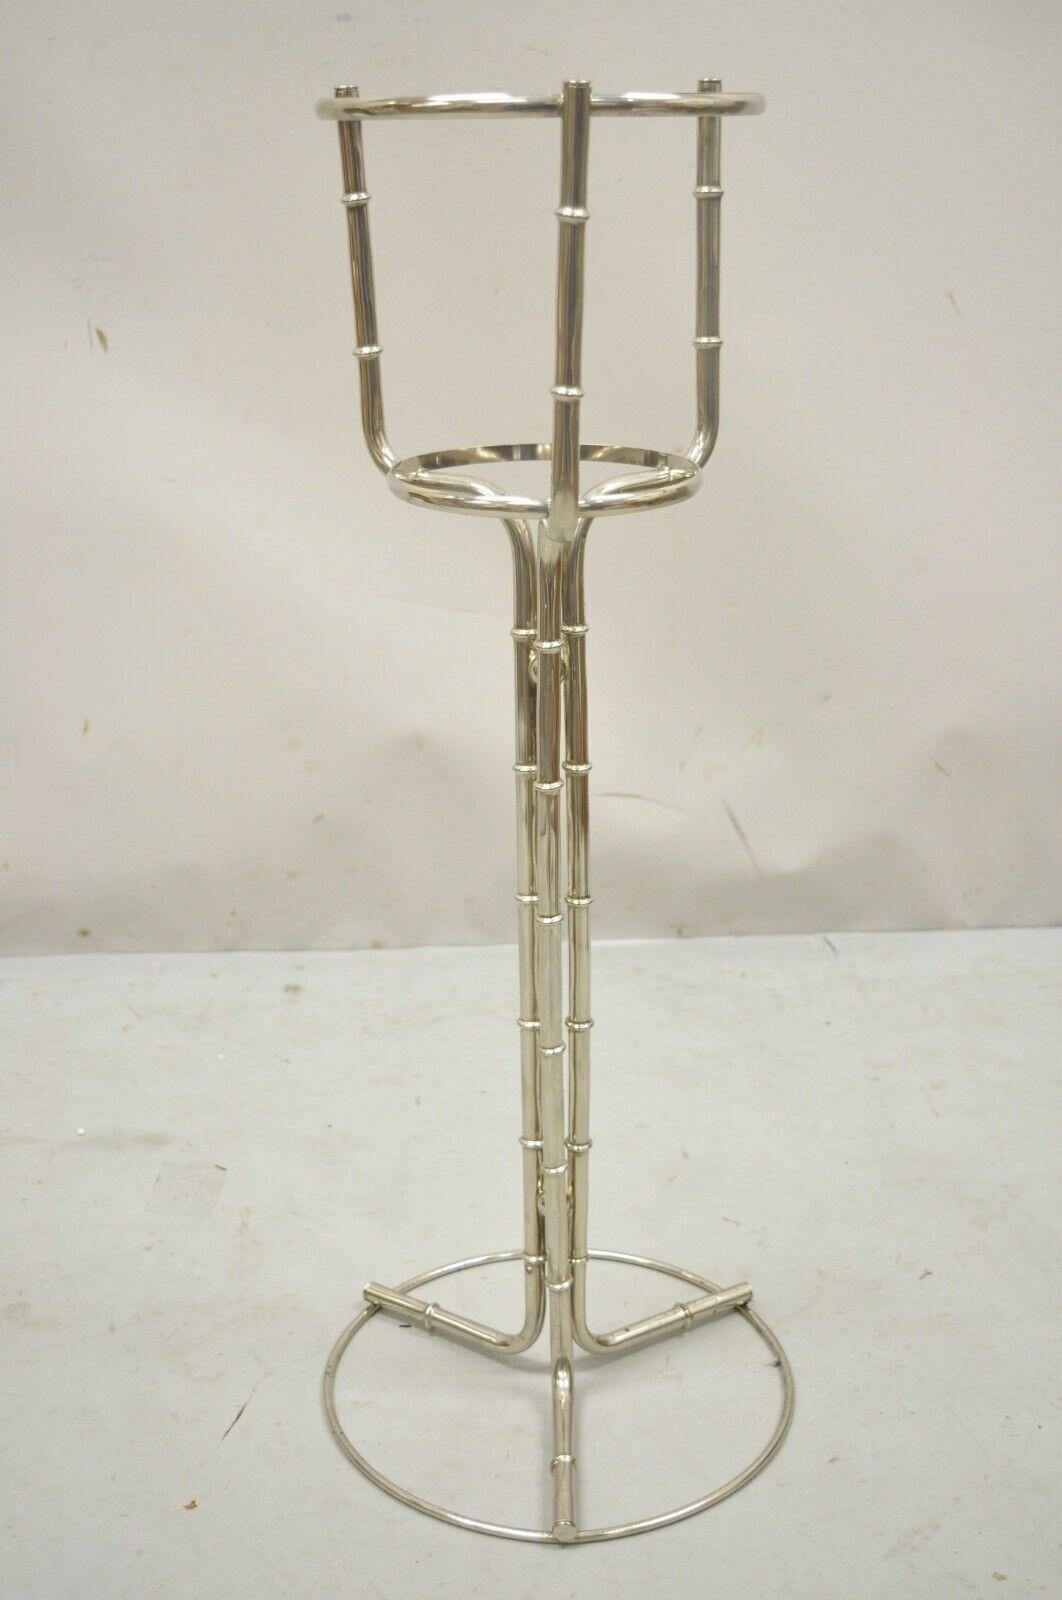 Vintage Hollywood Regency chrome faux bamboo champagne bucket ice chiller stand. Item features chrome metal faux bamboo frame, pedestal base, very nice vintage item, great style and form. mid 20th century. Measurements: 28.5